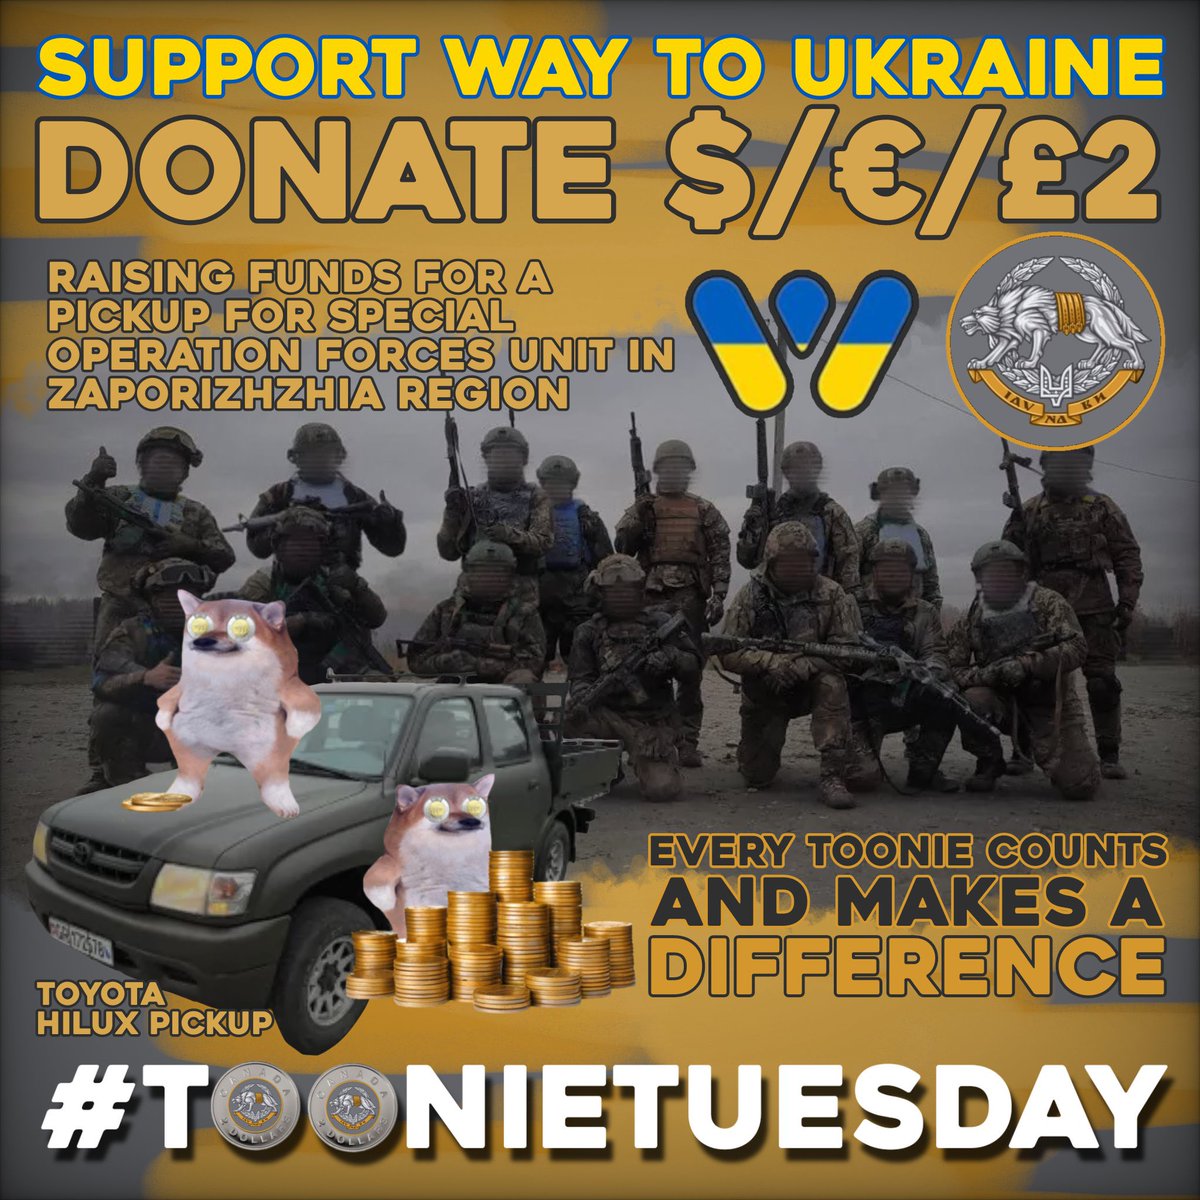 Still plenty of #toonietuesday left across the 🌎 don't delay get your #toonie in today! @WayToUkraine are raising funds for a 🛻 for Special Operation Forces ! Pay pal: melnykov_sergiy@ukr.net send.monobank.ua/jar/7SZ7KaujV